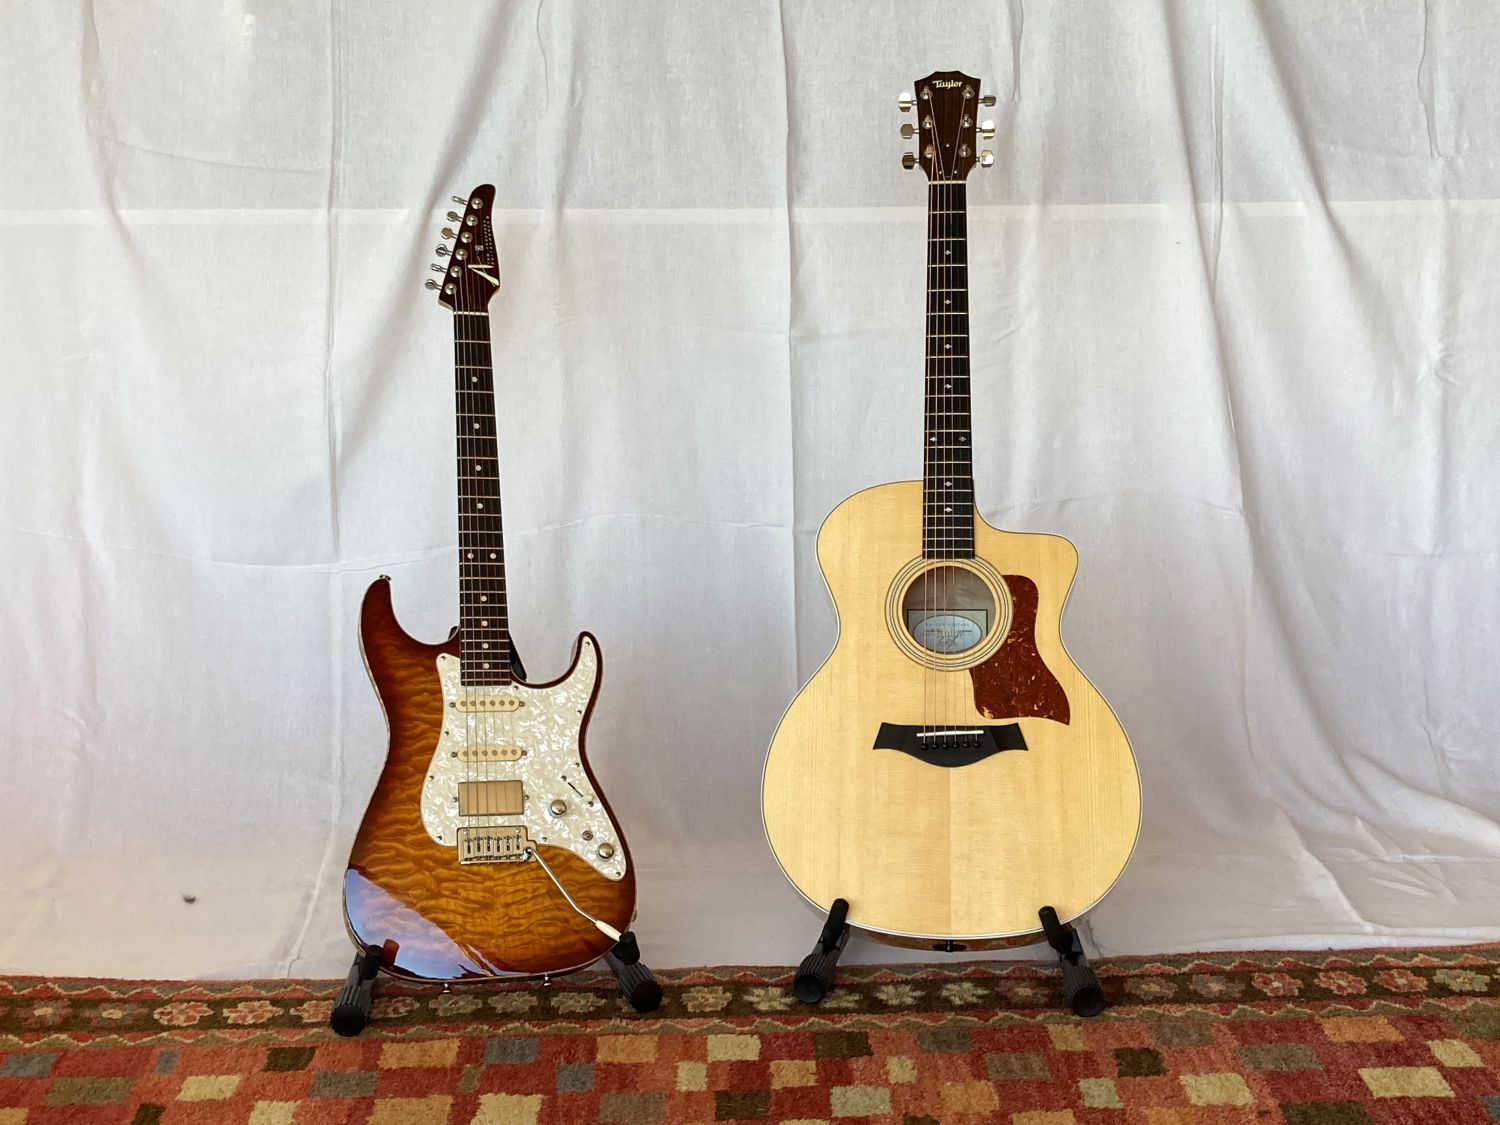 The Bare Essentials – A Fat Strat and a Cutaway Acoustic Guitar